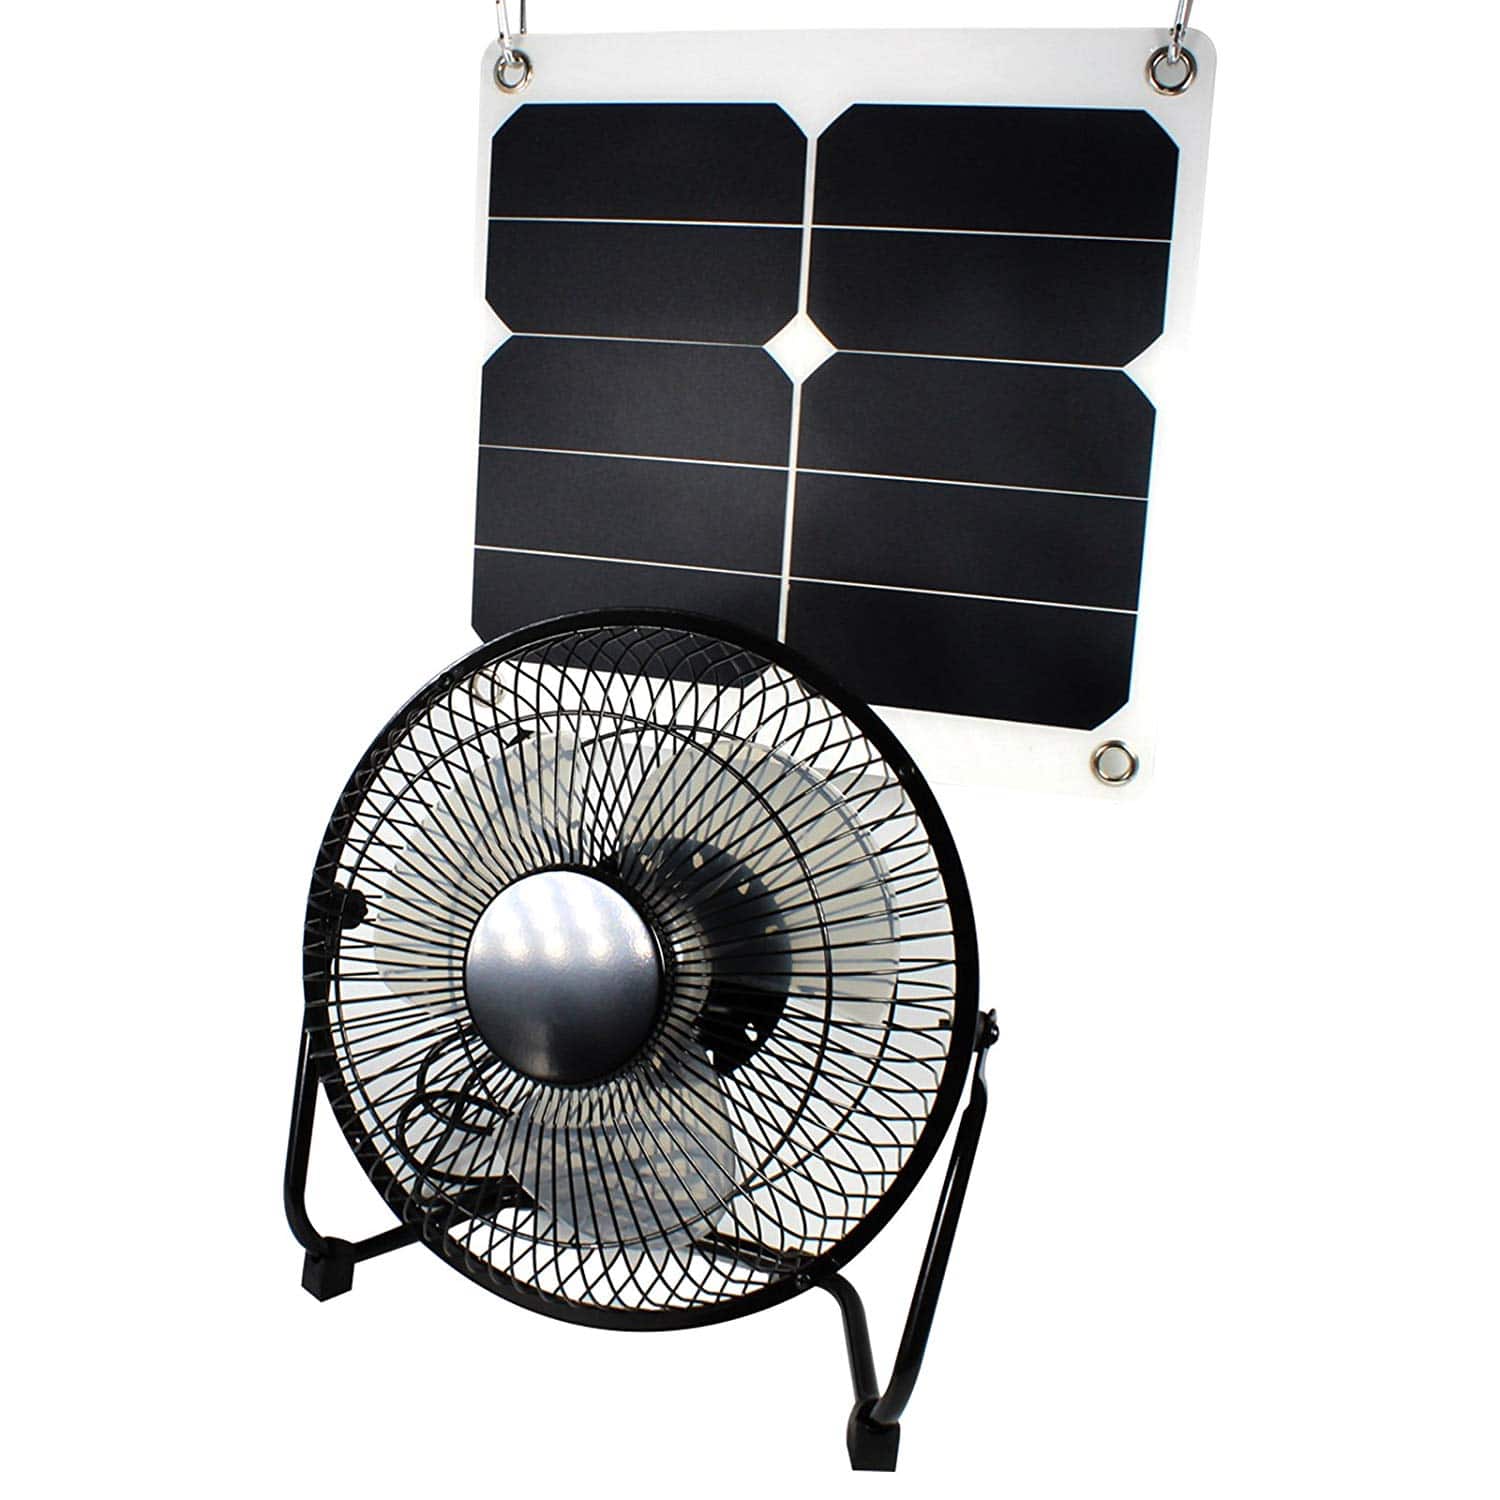 Top 10 Best Solar Powered Fans in 2022 Reviews - Buyer's Guide Tools